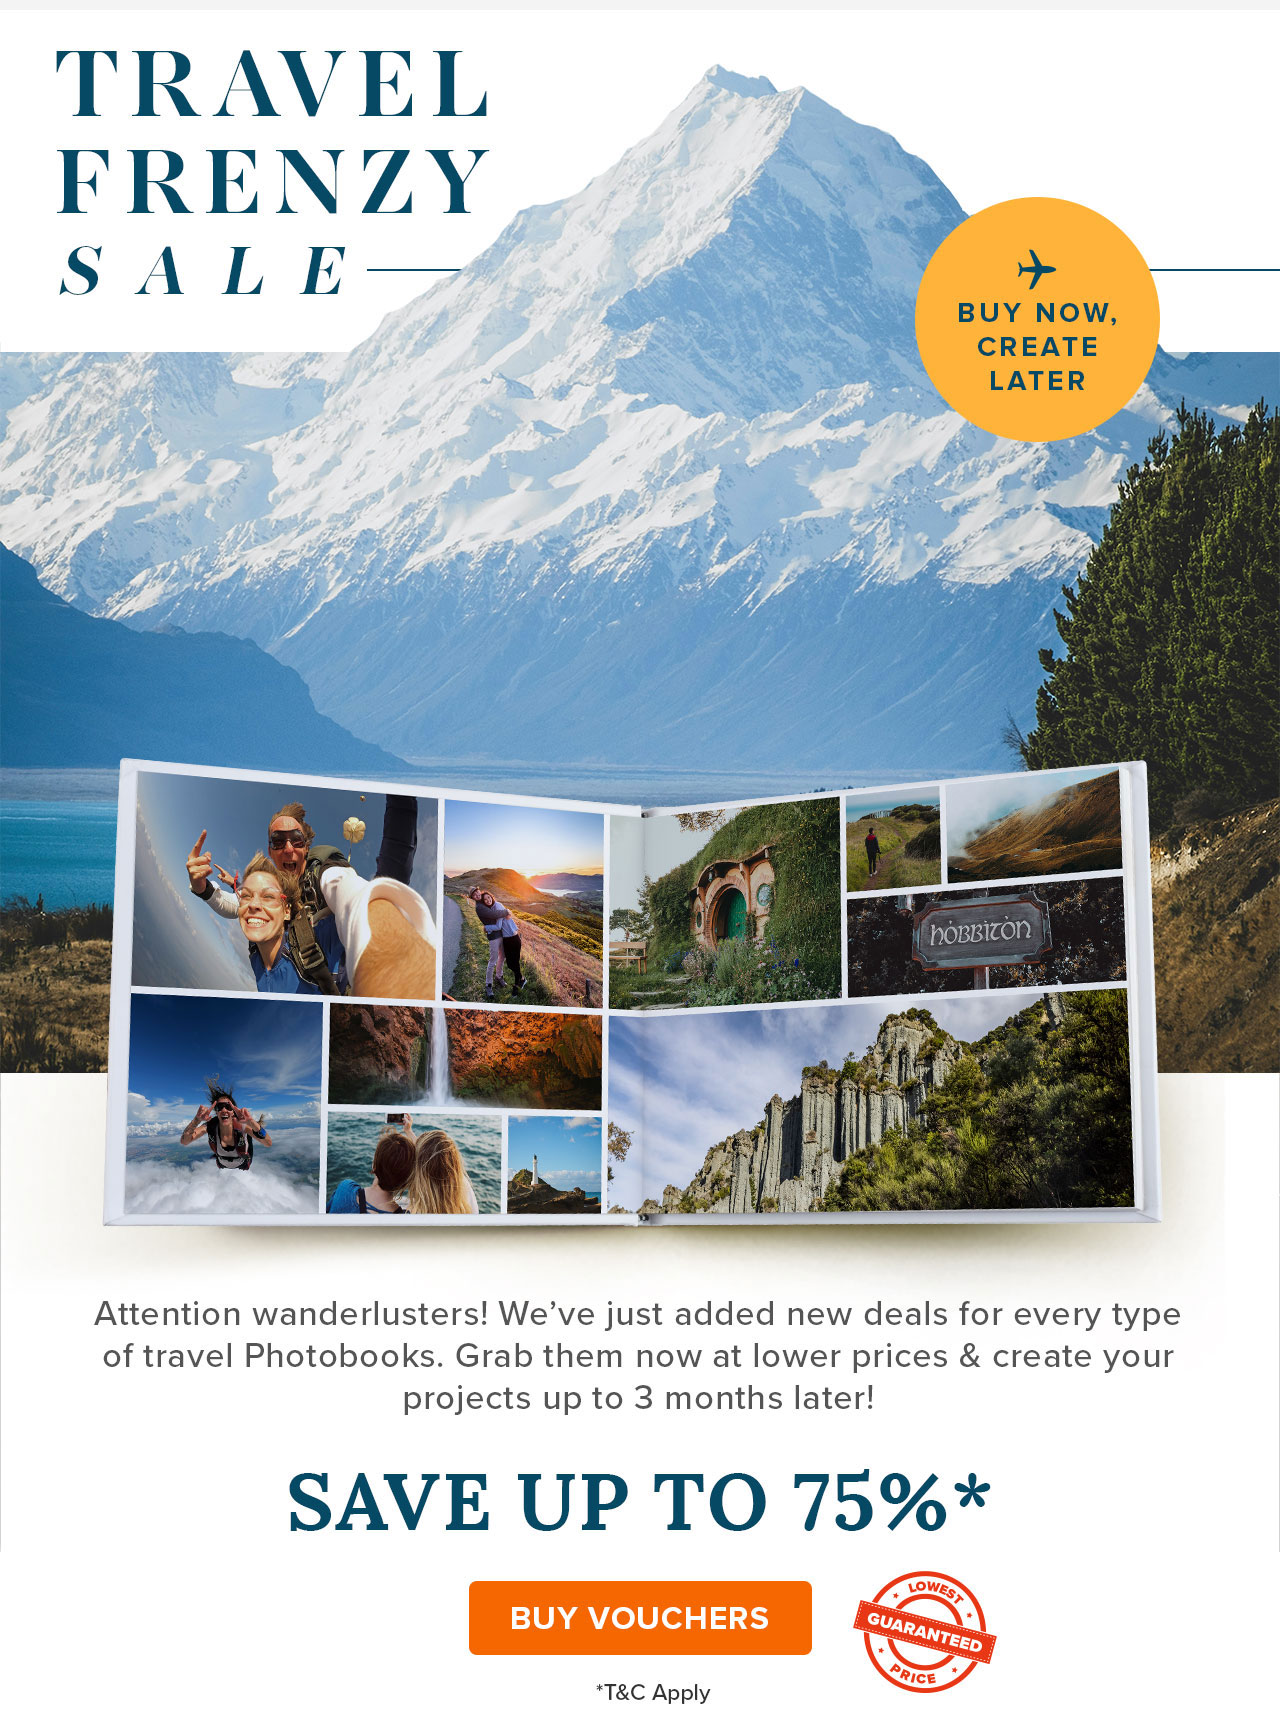 Travel Frenzy Sale | SAVE UP TO 75% | BUY VOUCHERS